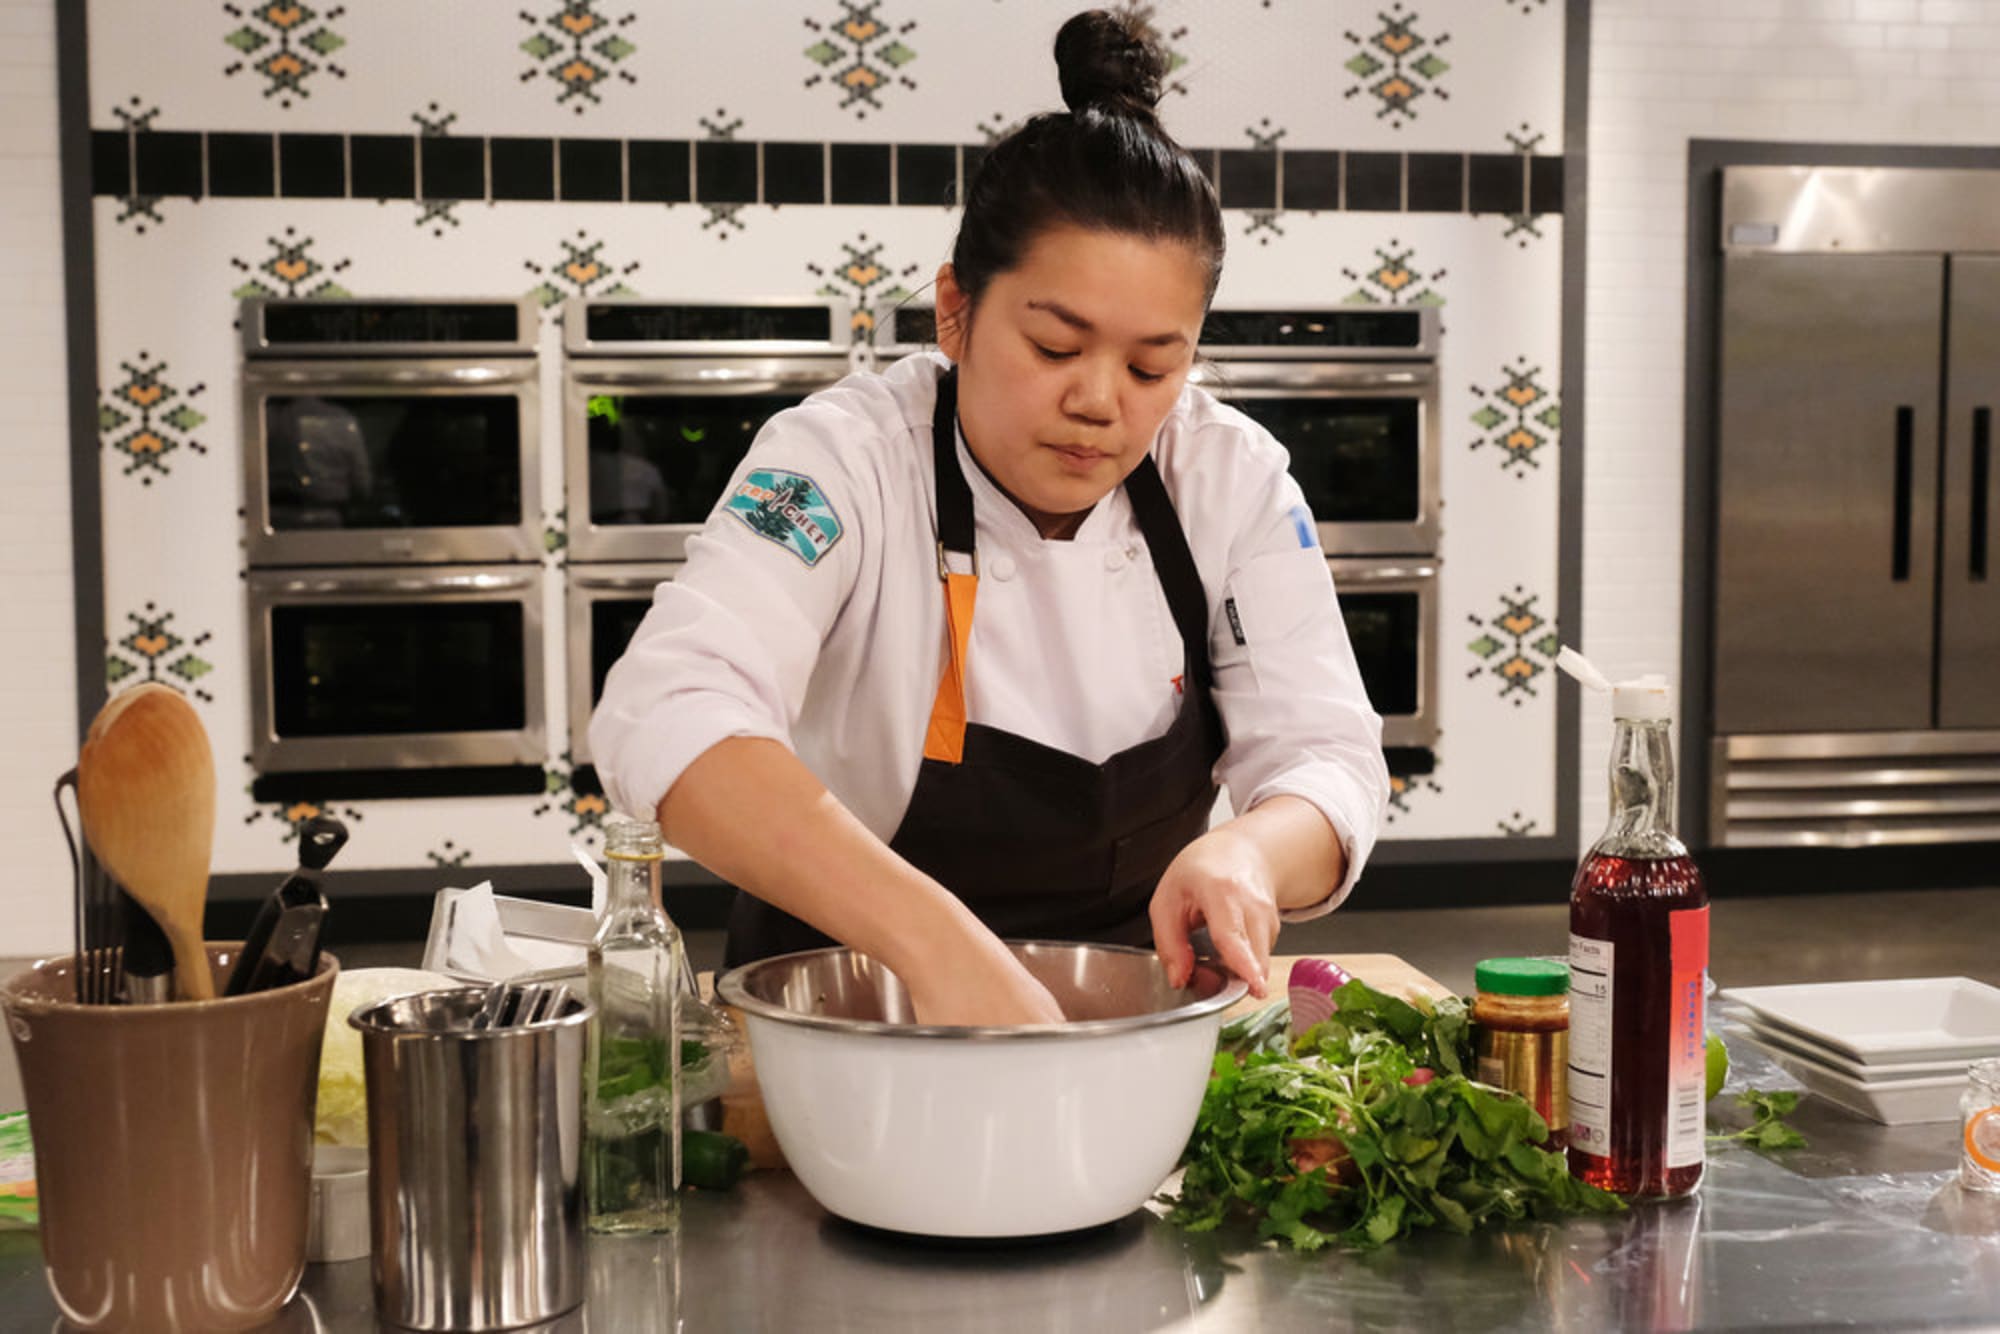 Top Chef: Why it's the best cooking competition series